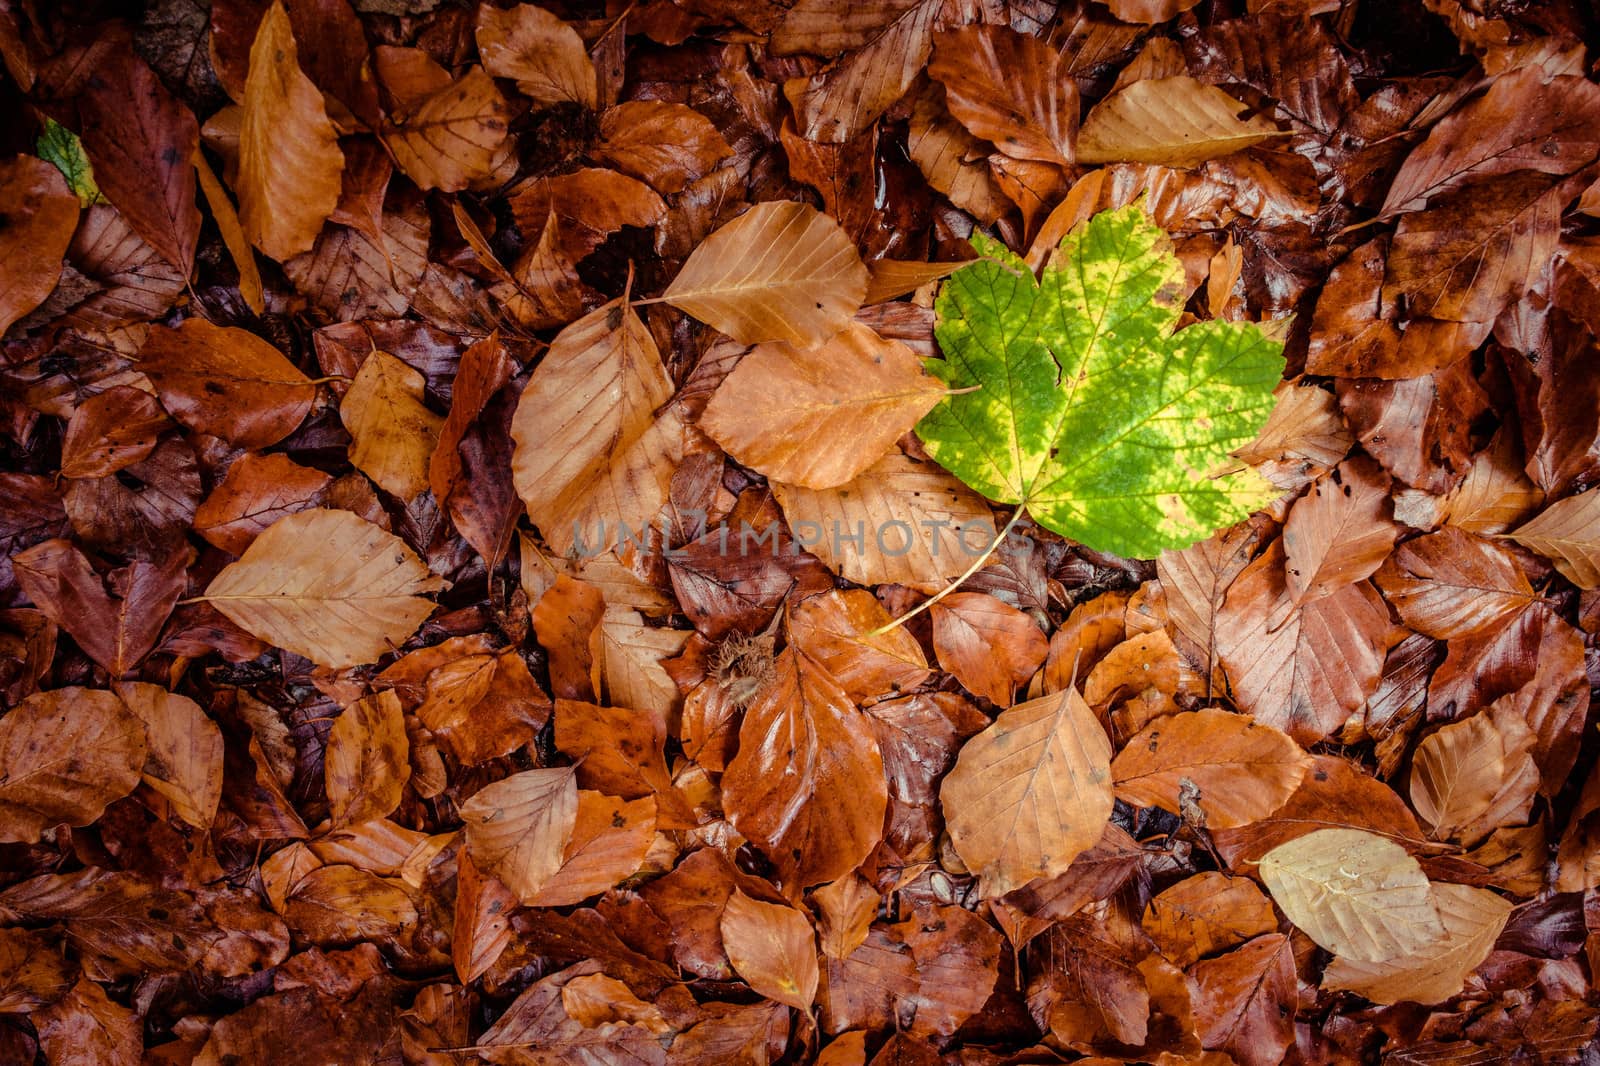 Fallen leaf in grass at autumn time